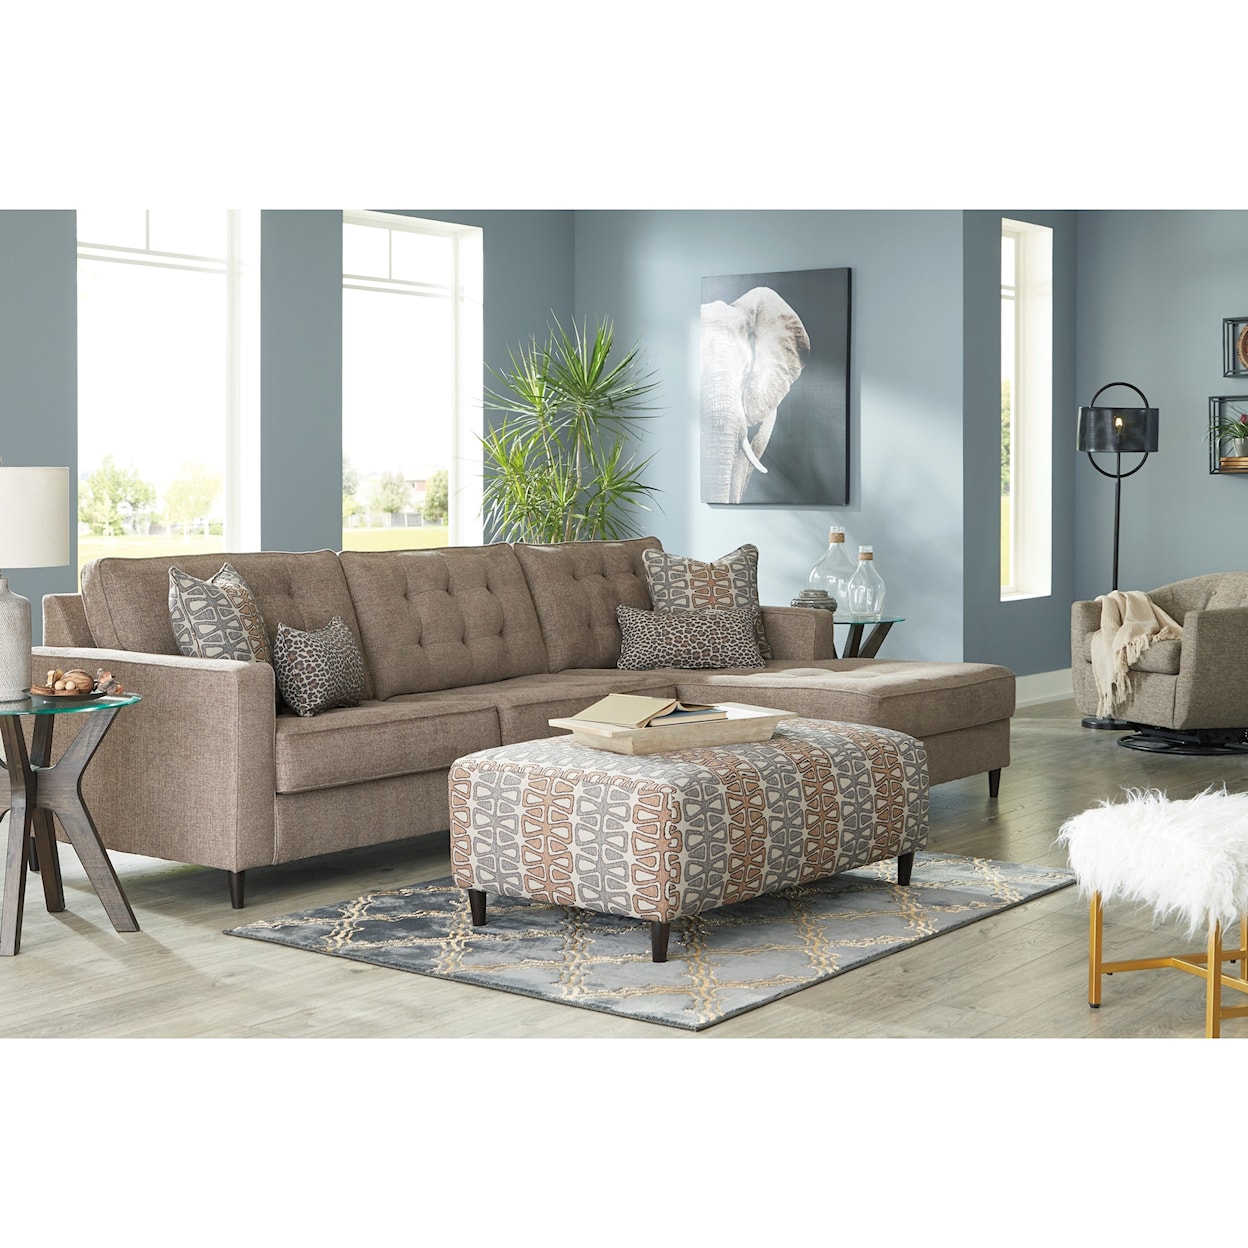 Signature Design by Ashley Furniture Flintshire 3 Seat Sectional Sofa w/ RAF Chaise